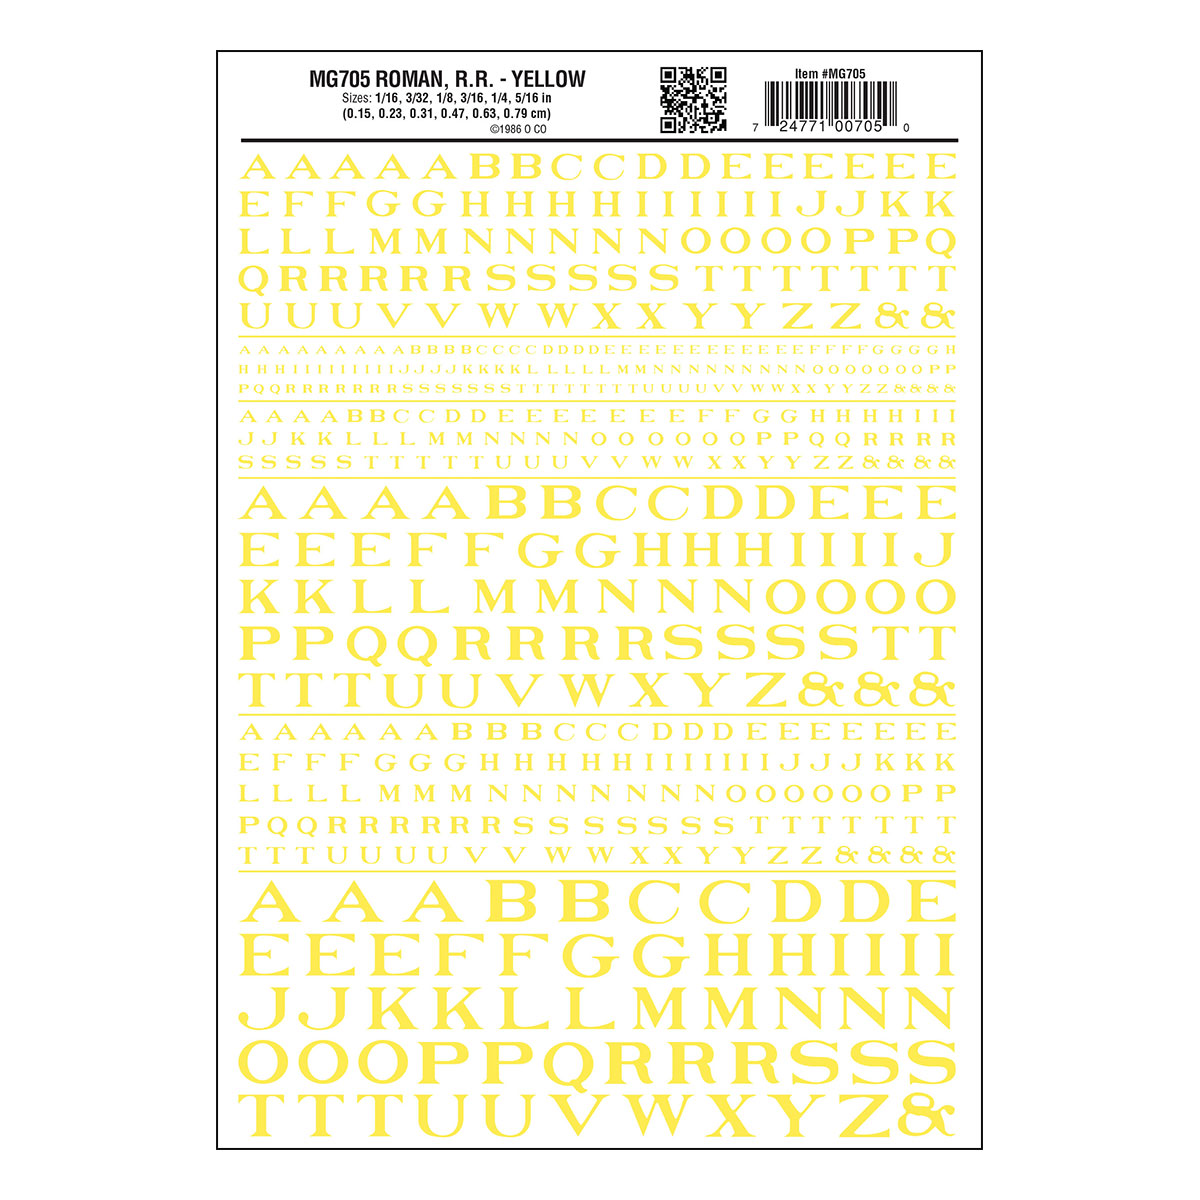 Roman R.R. Yellow - Package contains one sheet: 5 5/8" x 8 1/4" (14